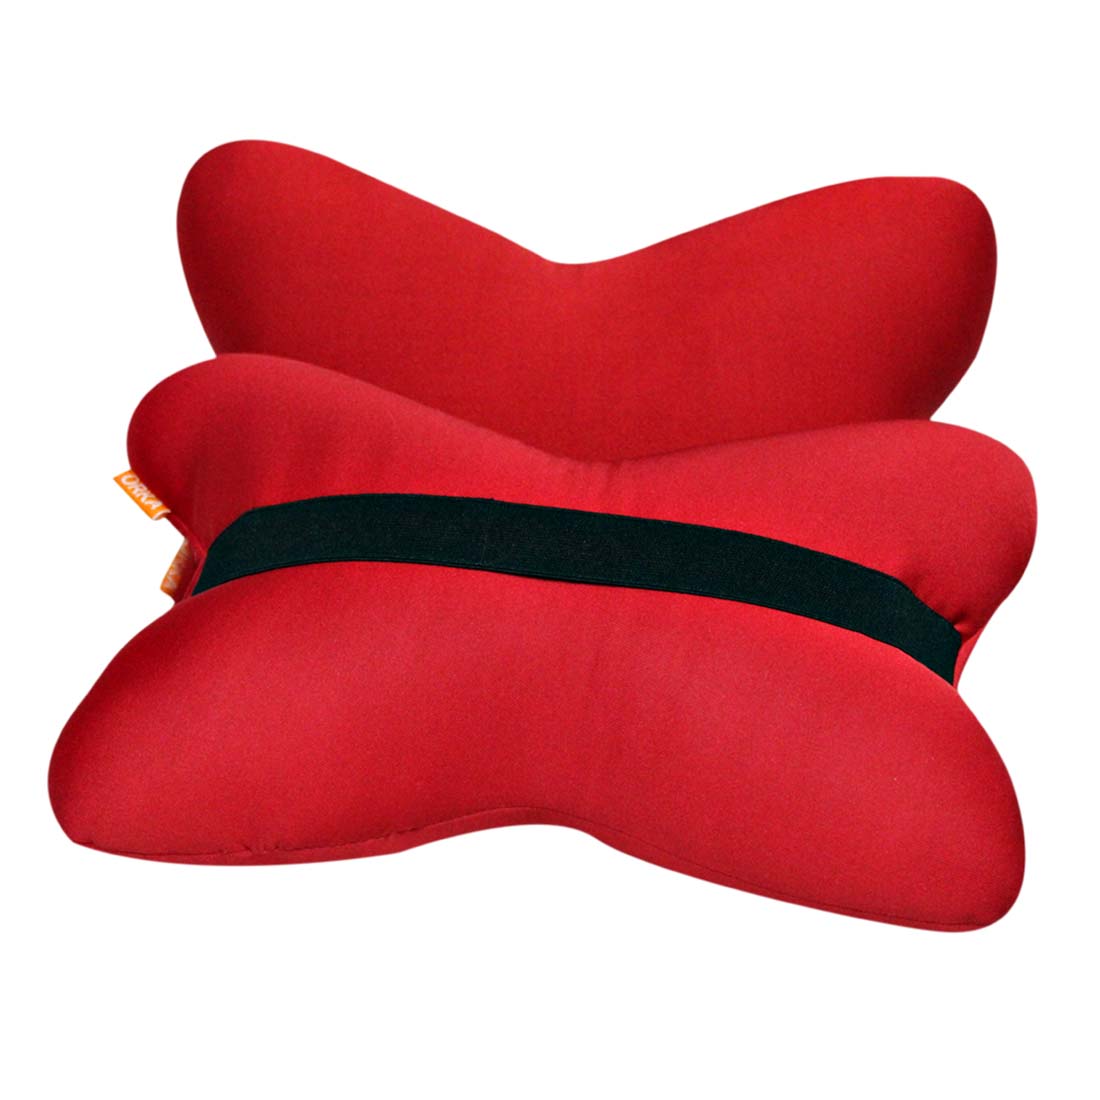 ORKA Classic Car Neckrest Pillow Filled With Microbeads [Pack Of 2] - Red  